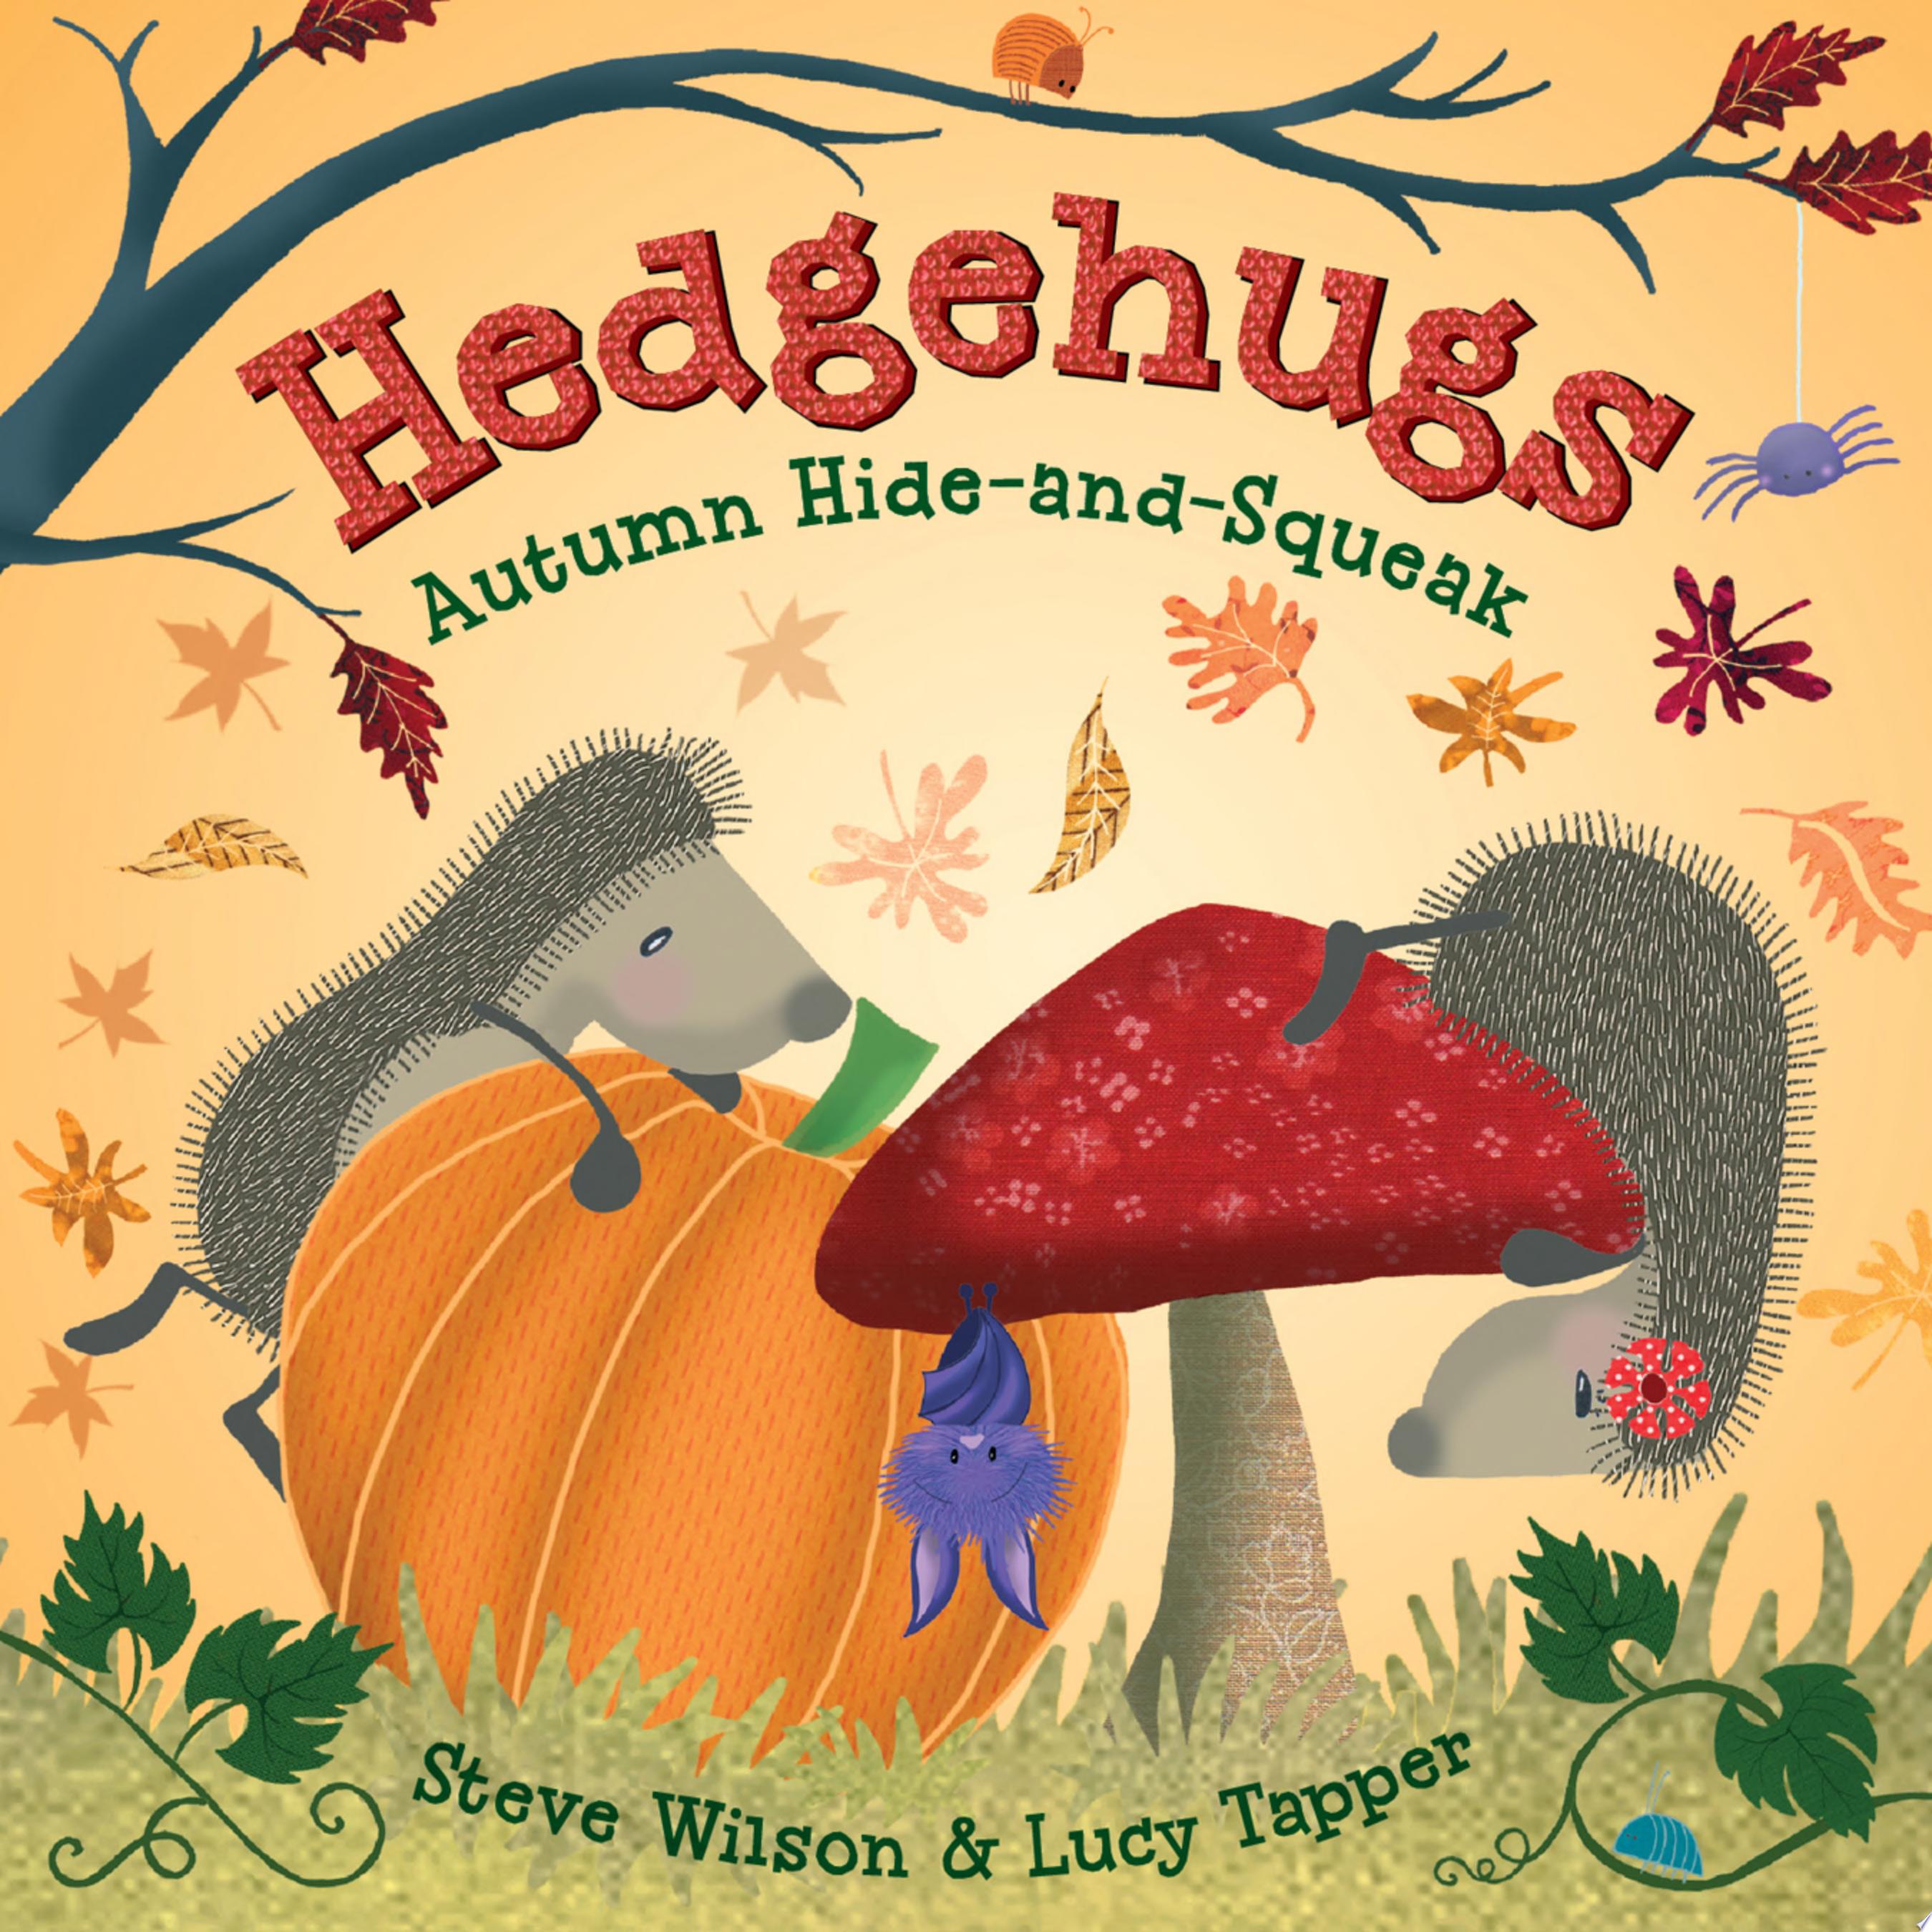 Image for "Hedgehugs: Autumn Hide-and-Squeak"